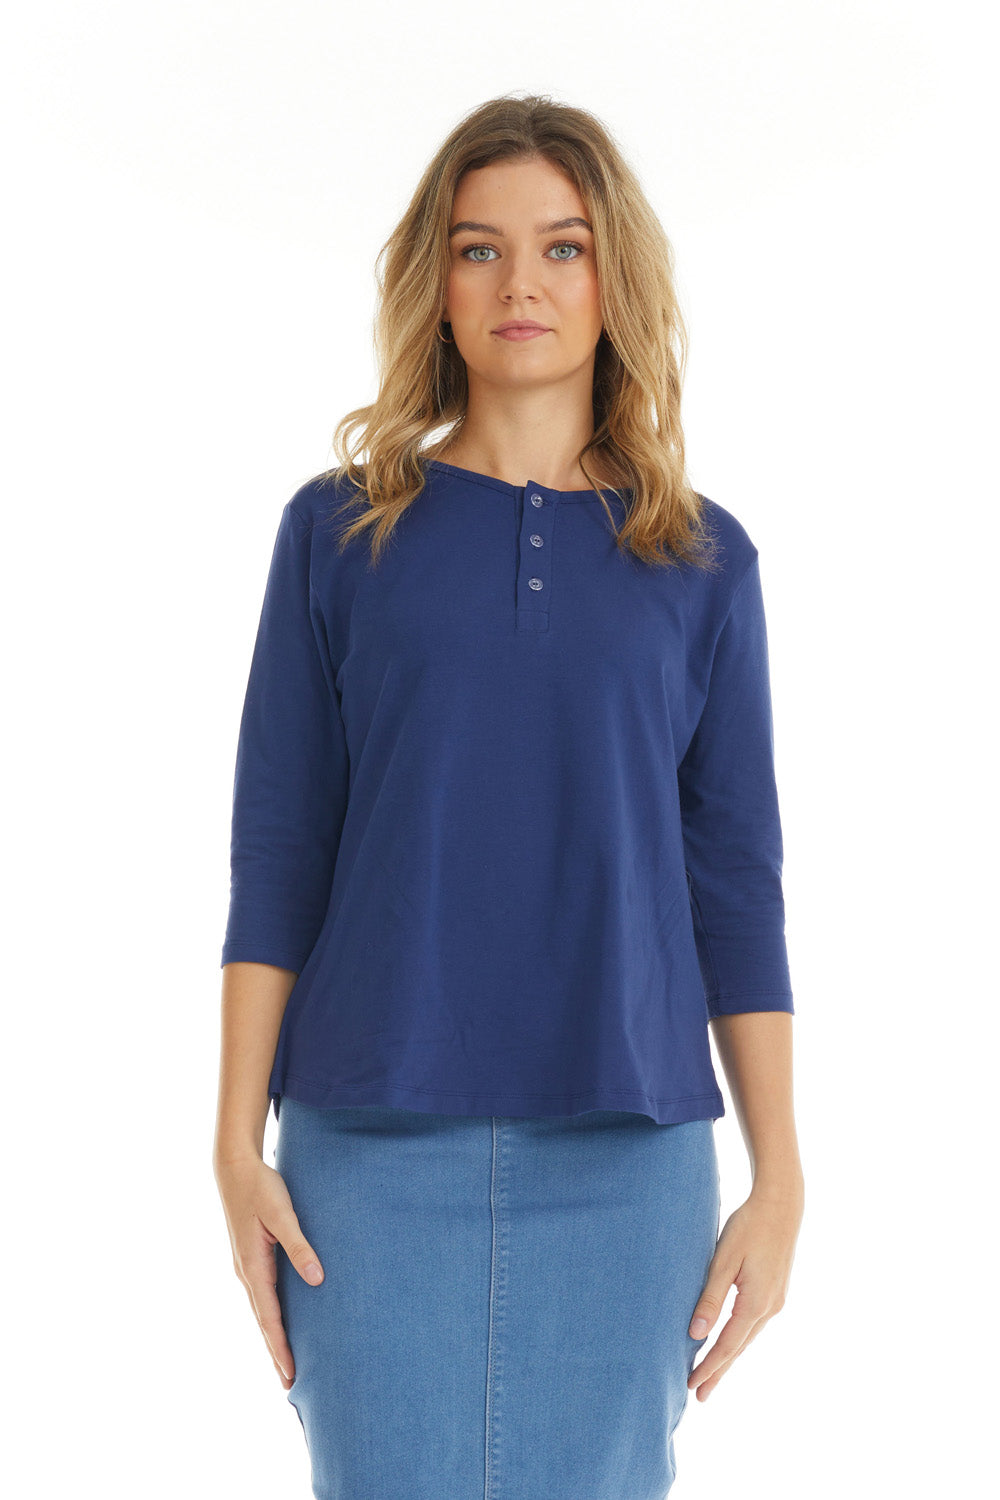 navy blue 3/4 sleeve cotton loose top to wear with jeans